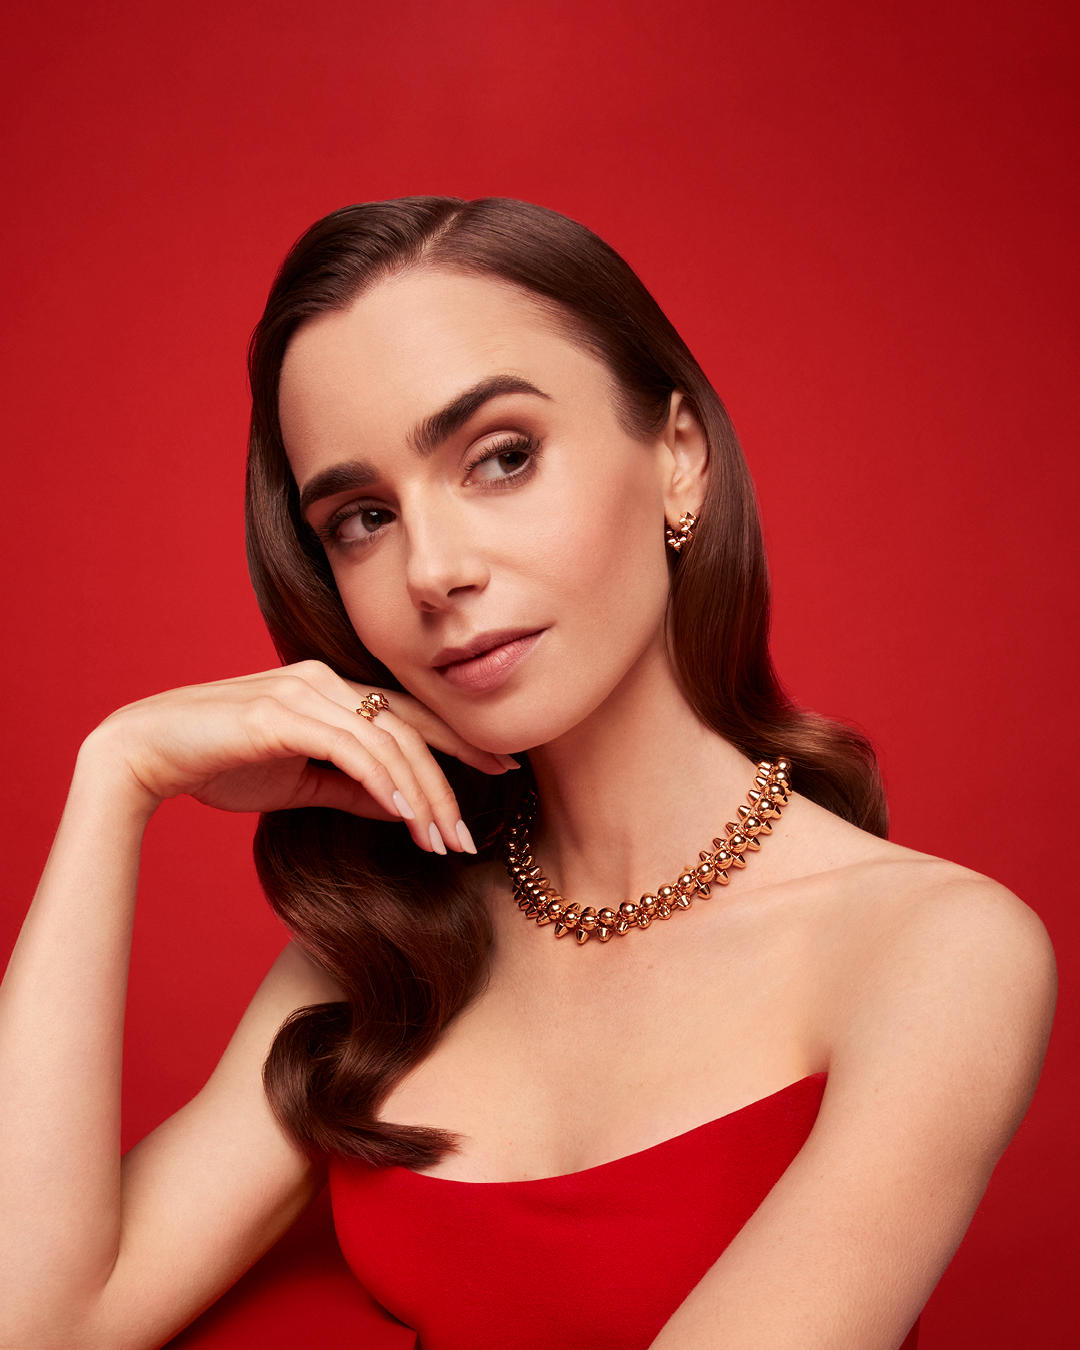 Cartier Official - Lily Collins shines in the refined duality of the #ClashdeCartier collection